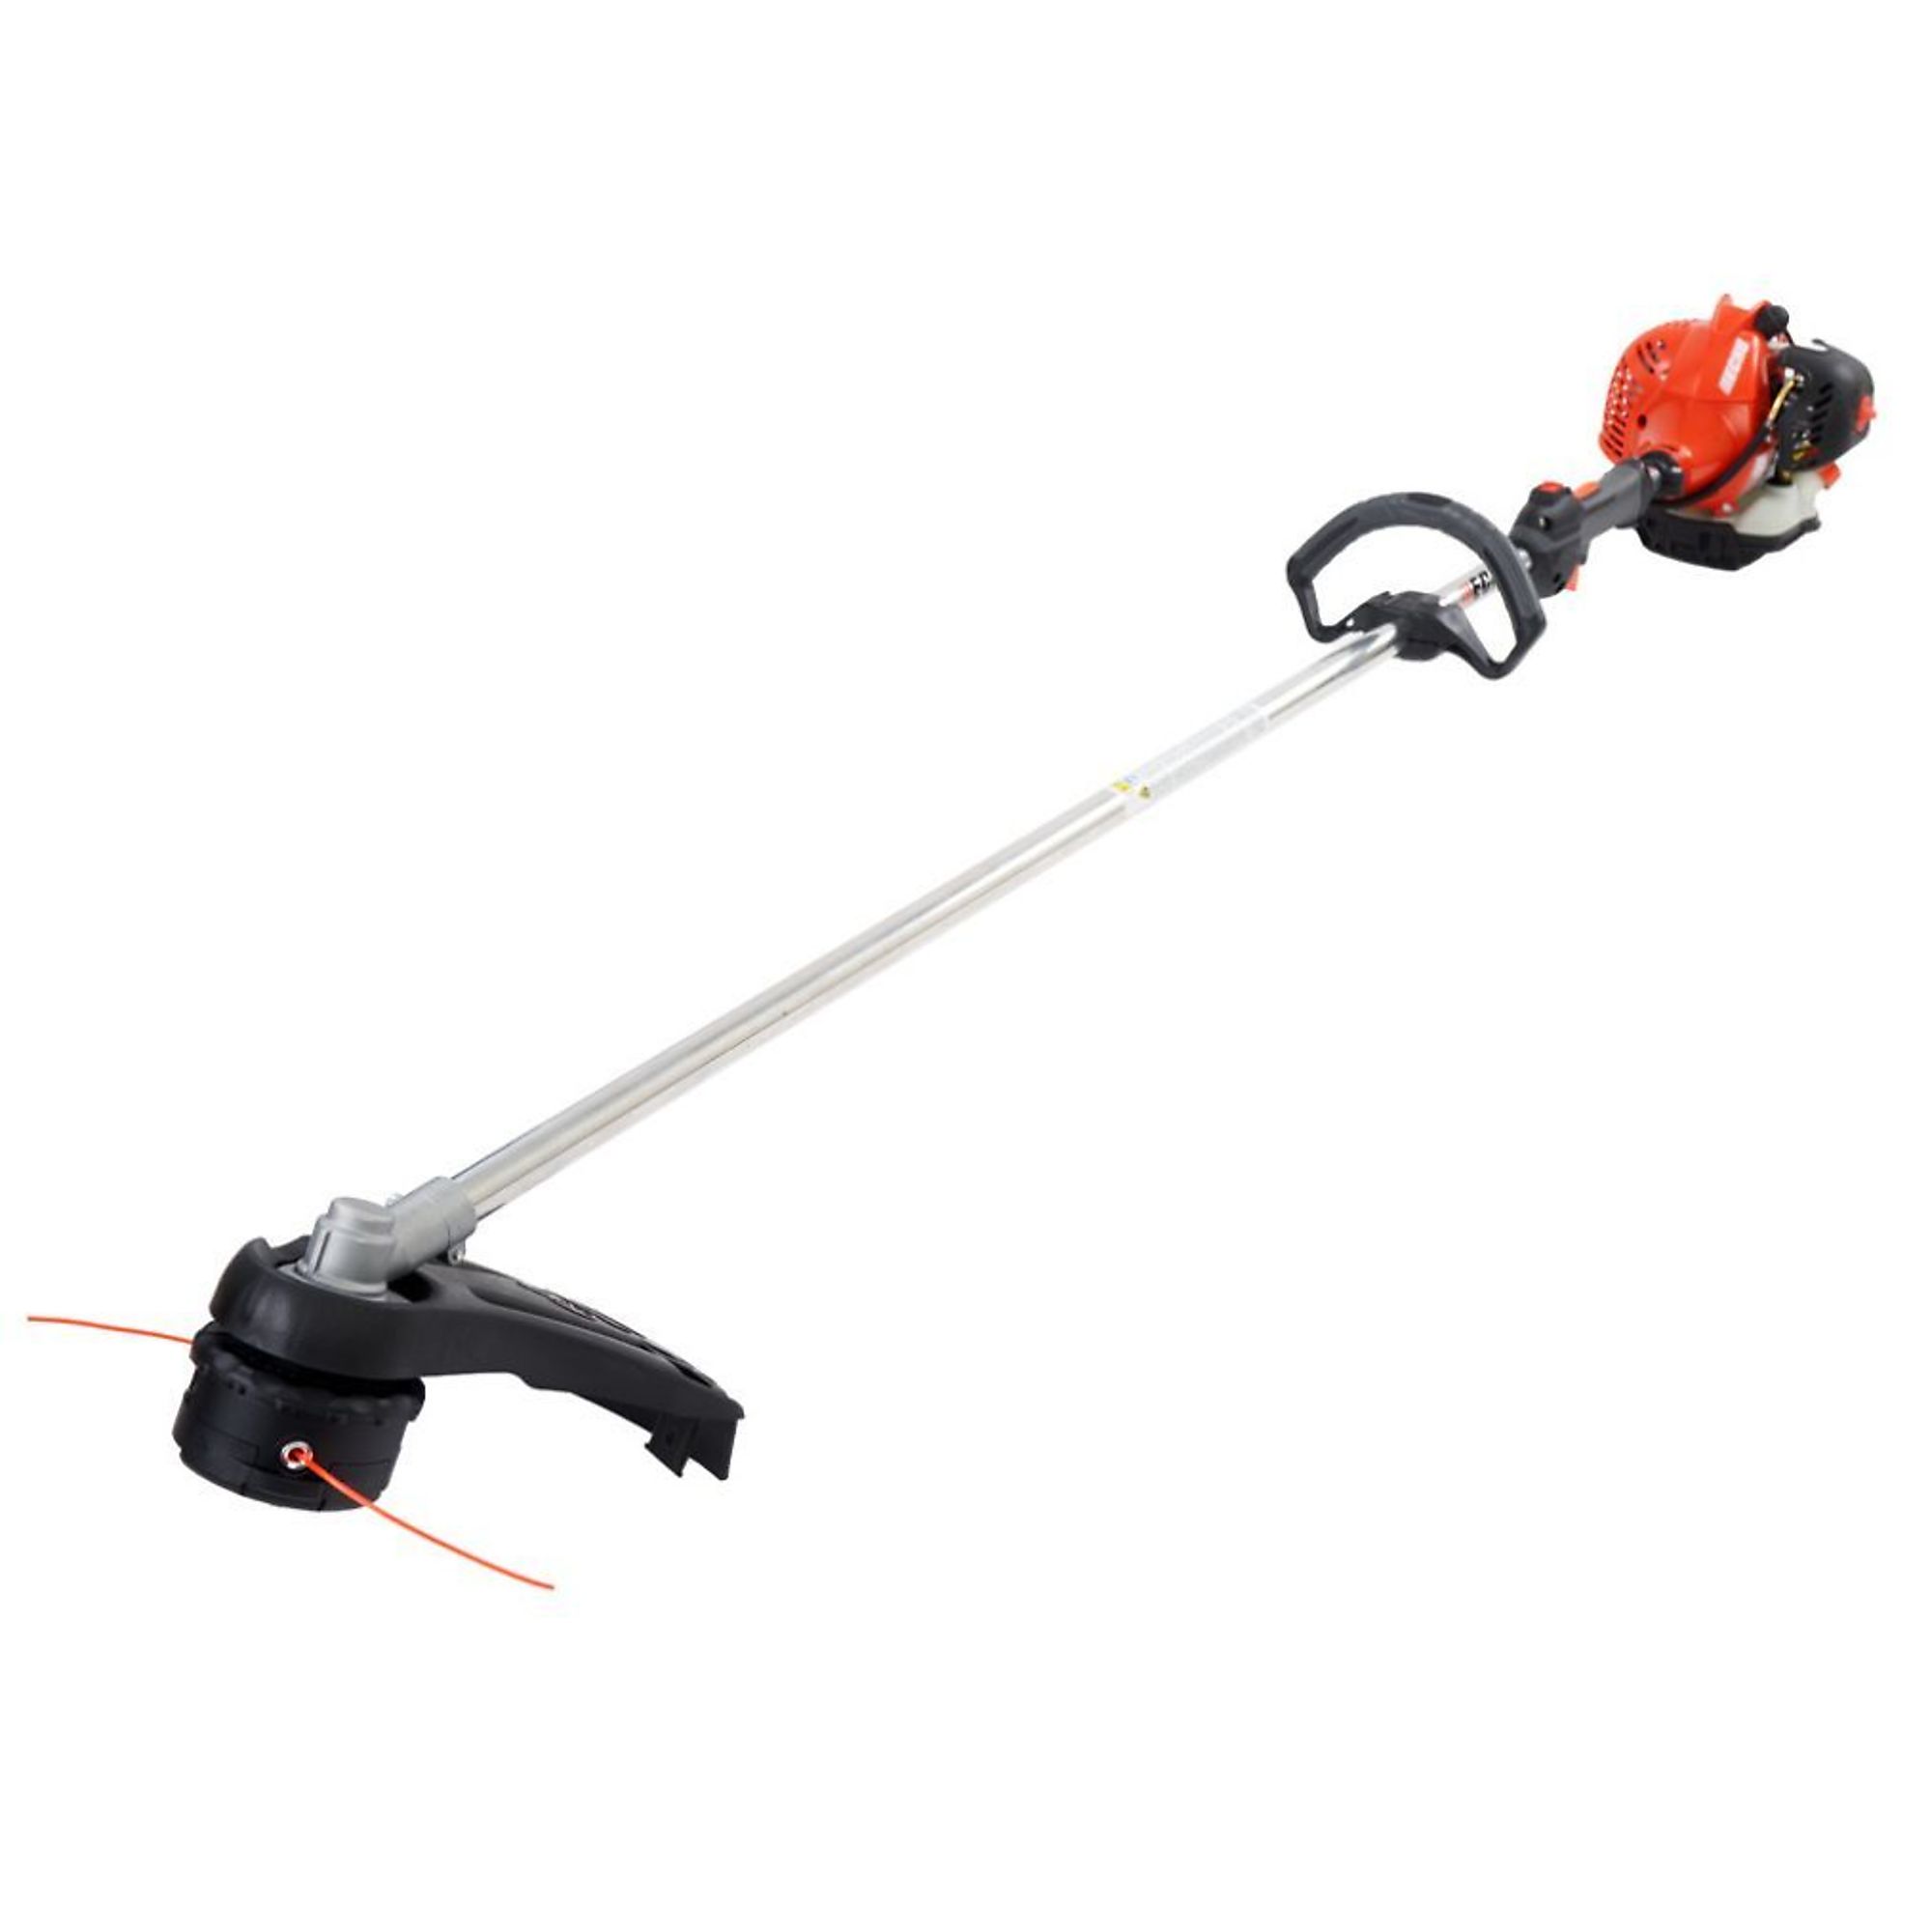 ECHO, Straight Shaft String Trimmer, Primary Power Source Gas, Engine Displacement 21.2 cc, Model SRM-225